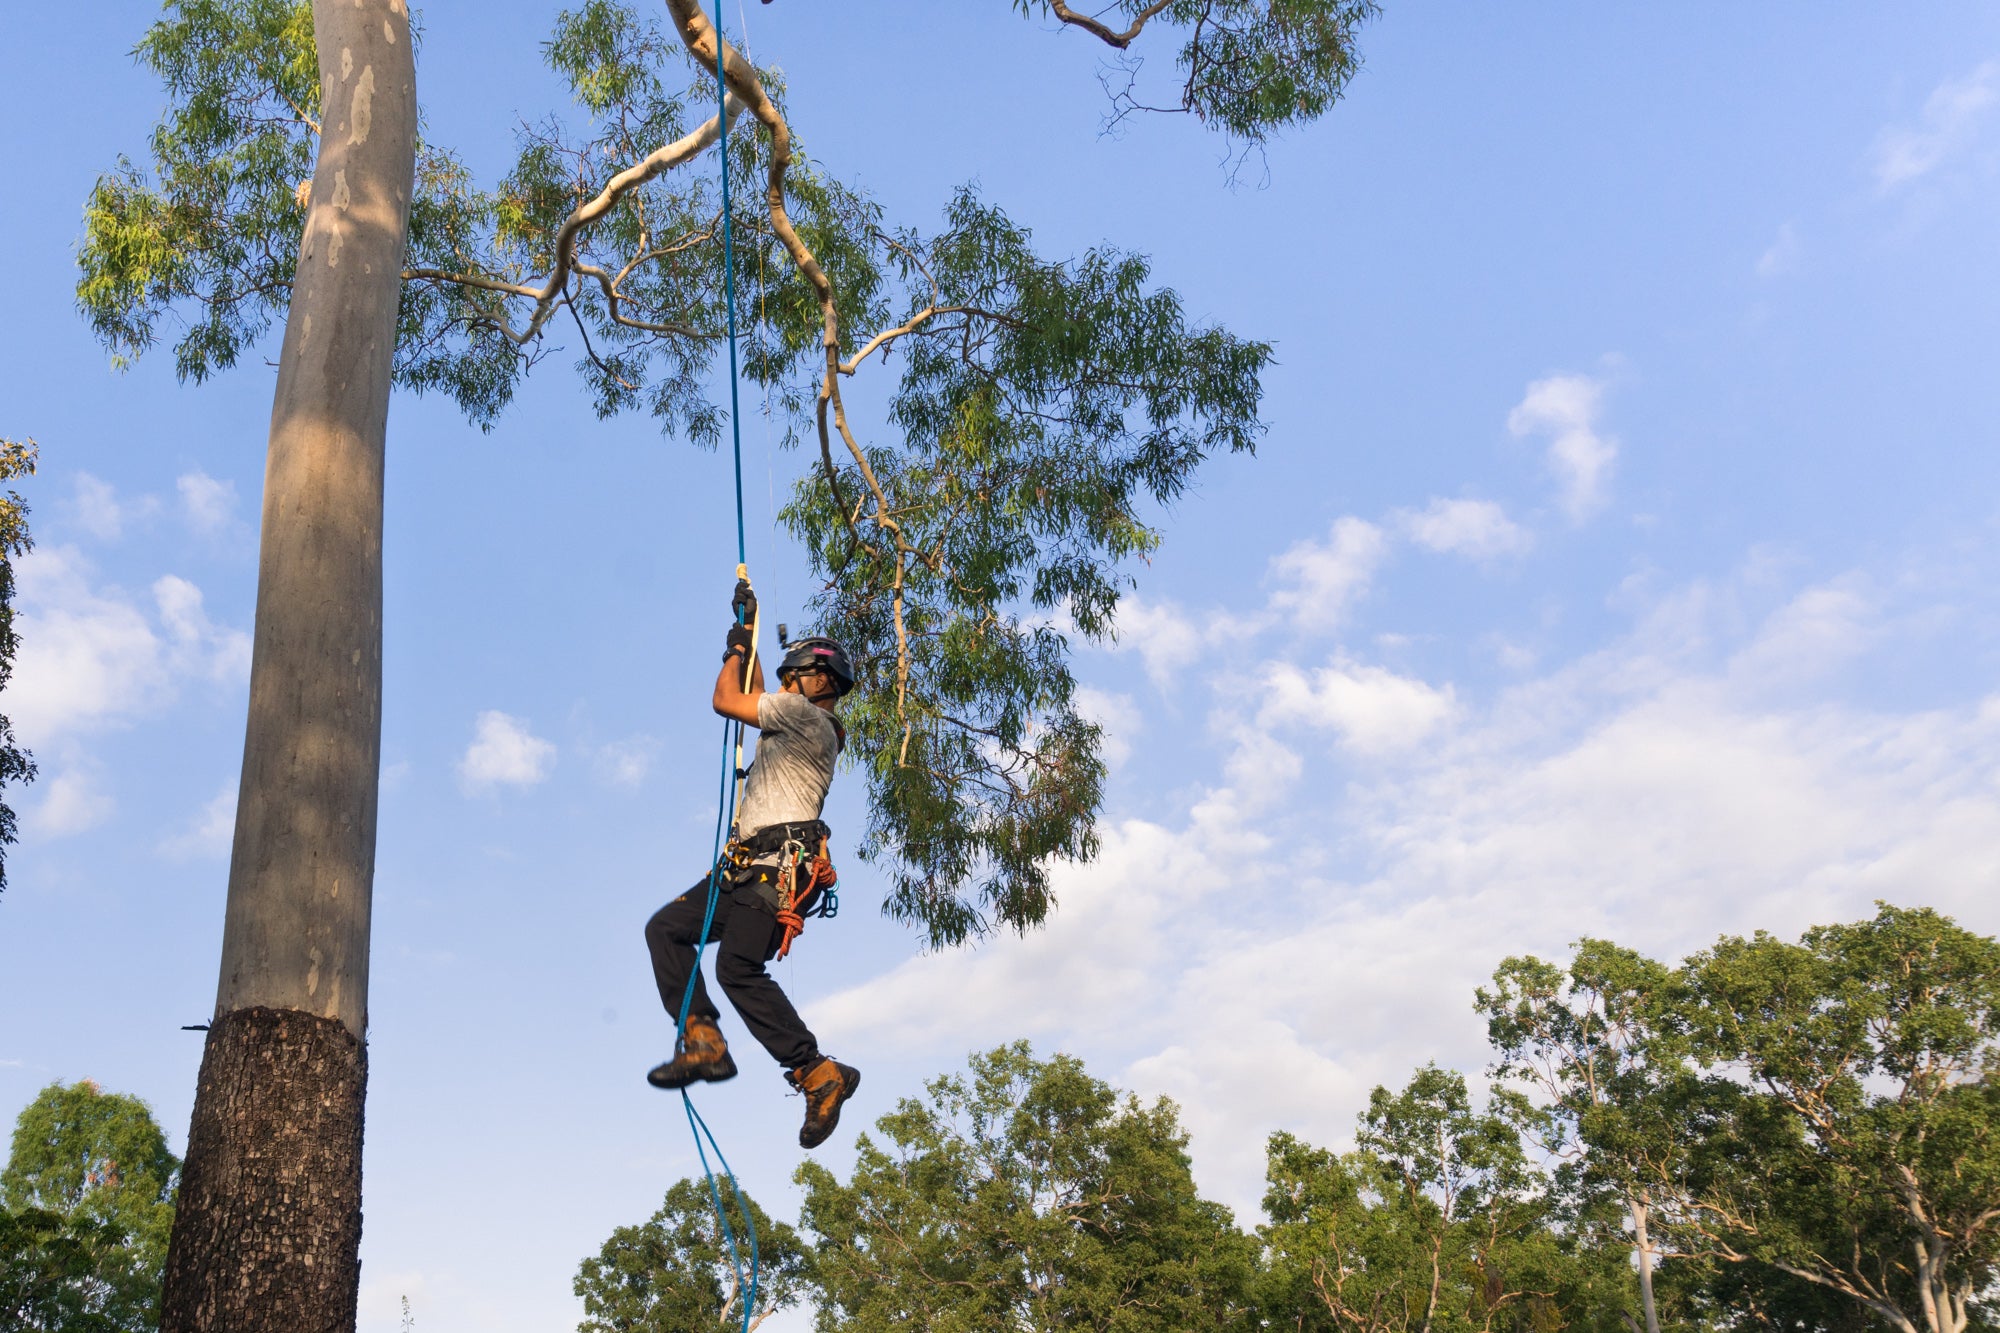 Freeworker Blog » On a strong line: Tree climbing ropes in tree care